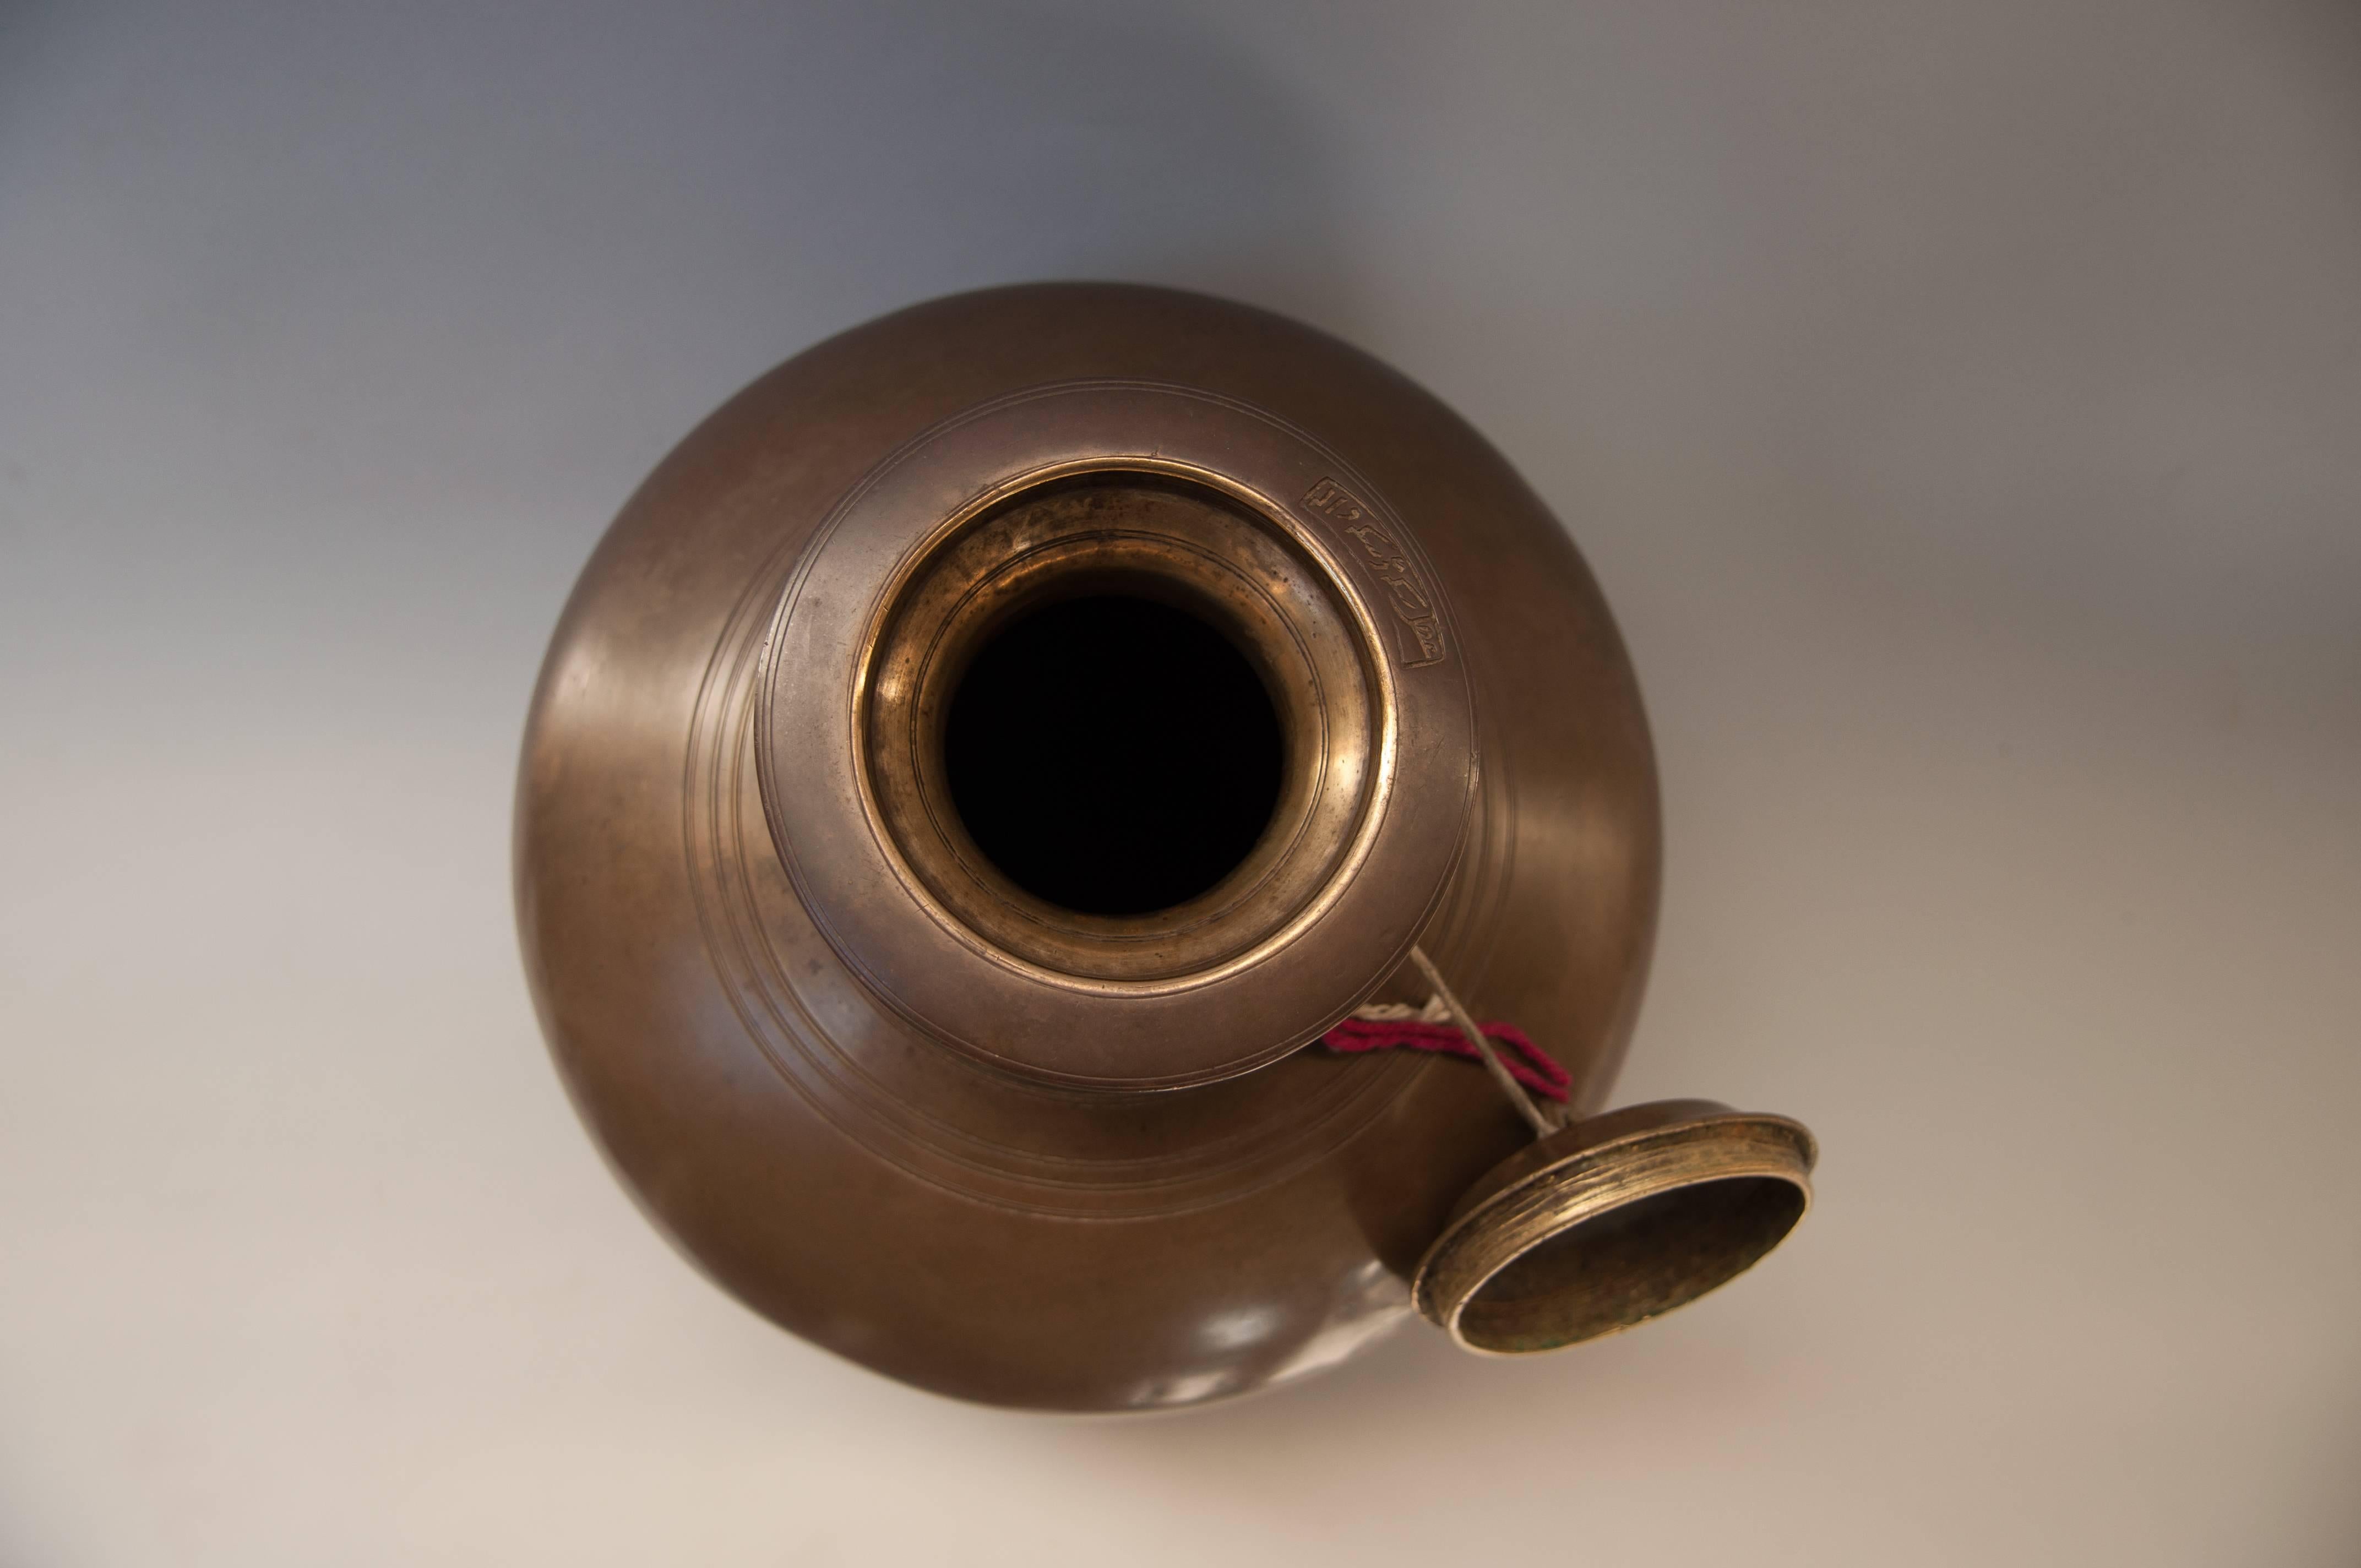 Hand-Crafted Bengali Brass Water Pot with Cap, Mid-20th Century, Bengal, India